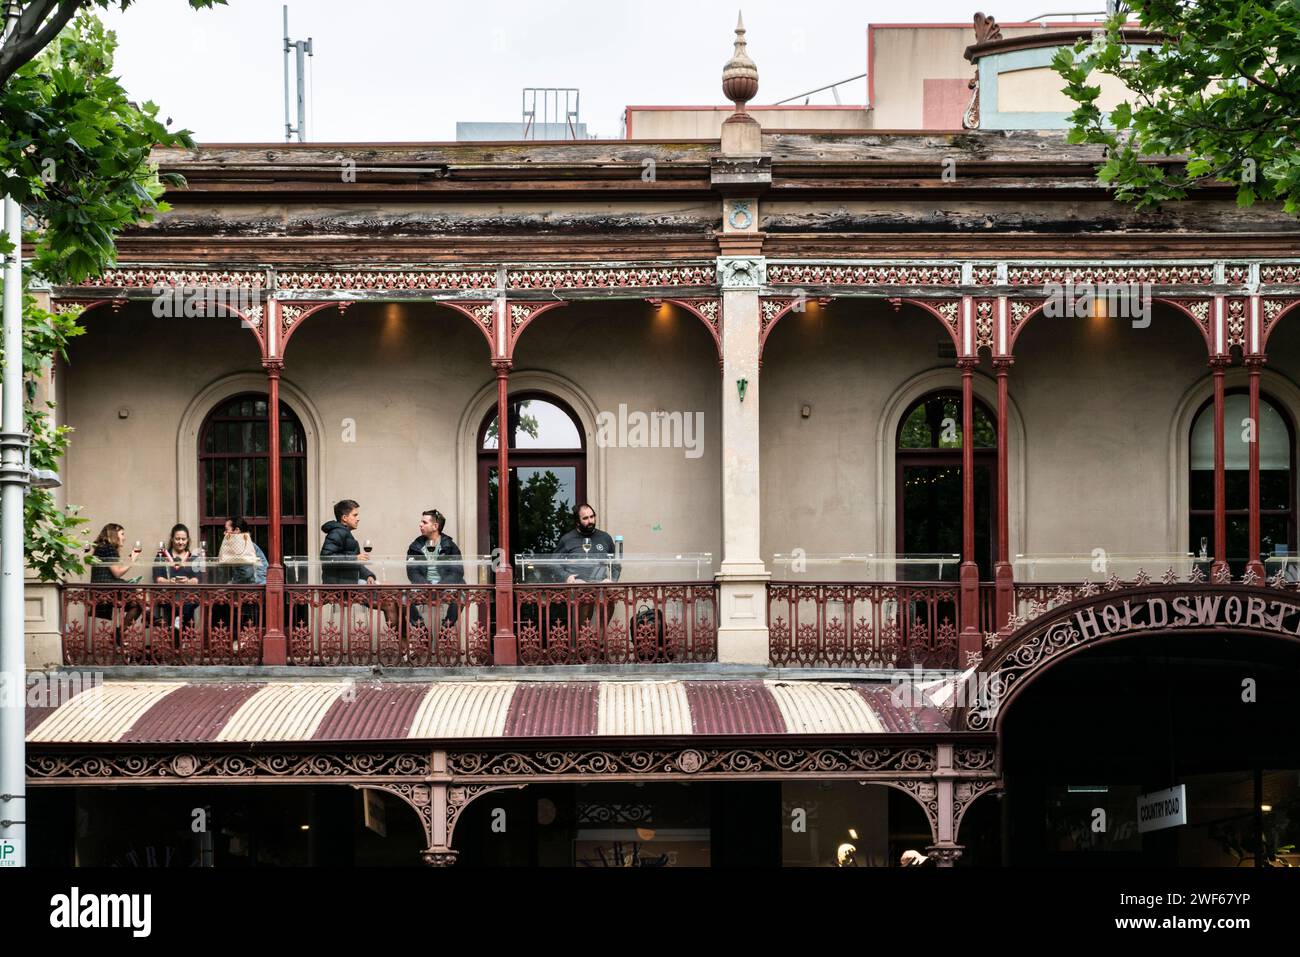 Group of people drinking on a terrace in a pub on Lygon Street, Melbourne, Victoria, Australia Stock Photo